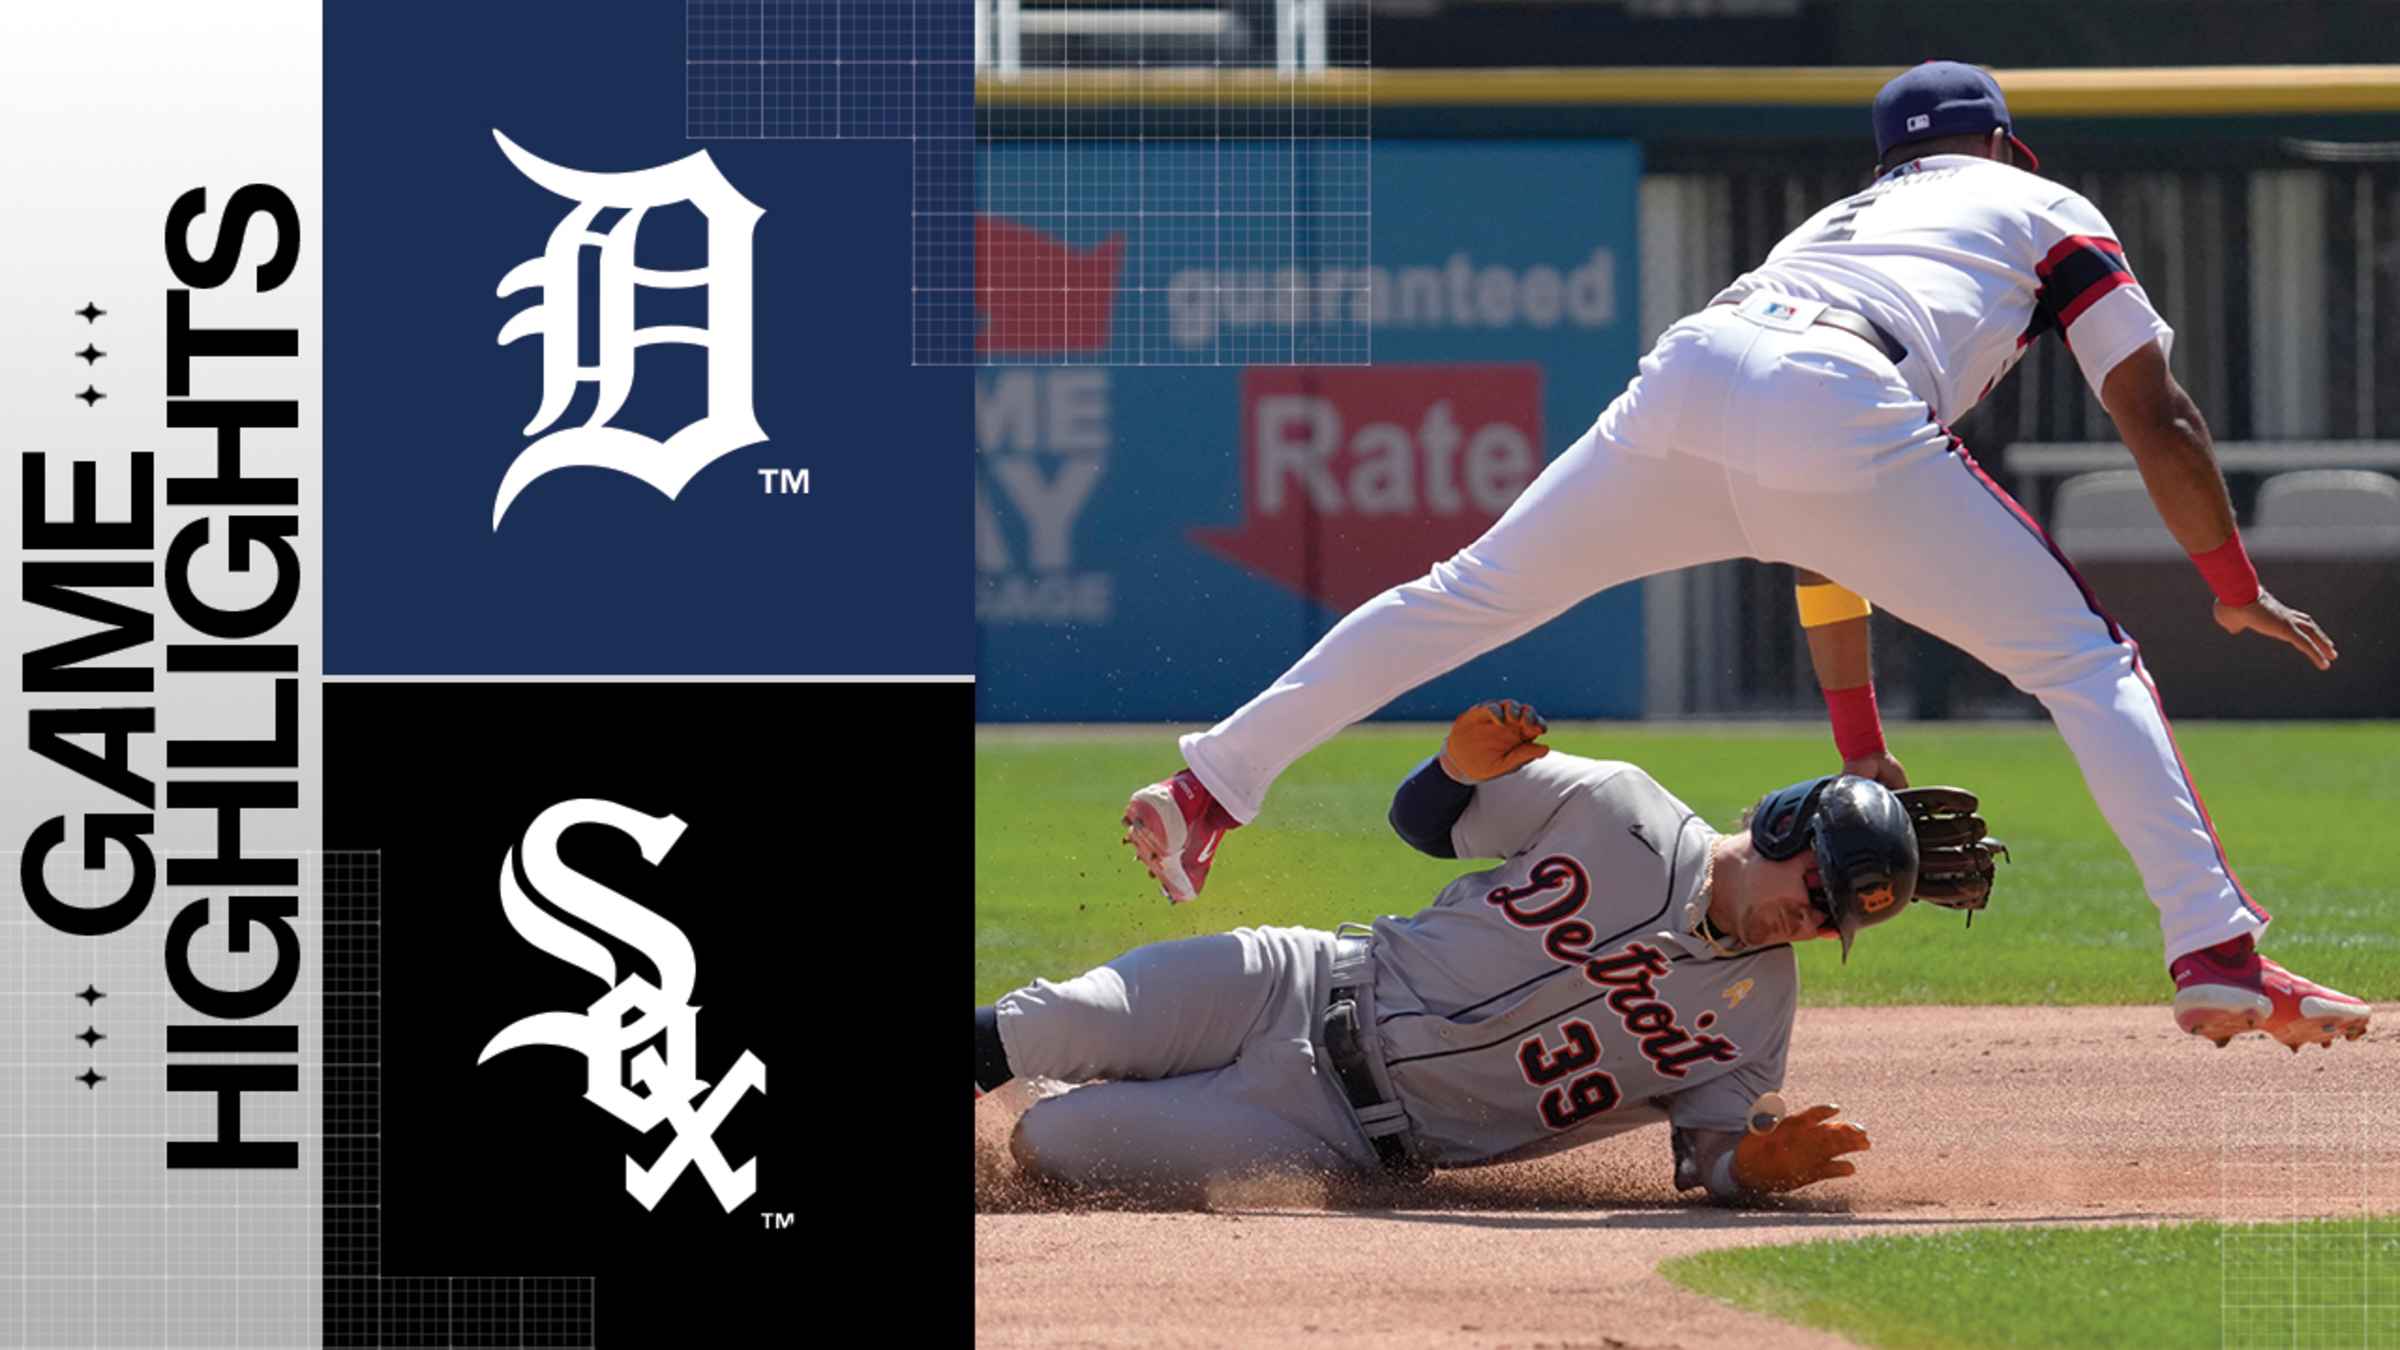 Tigers 3, White Sox 2